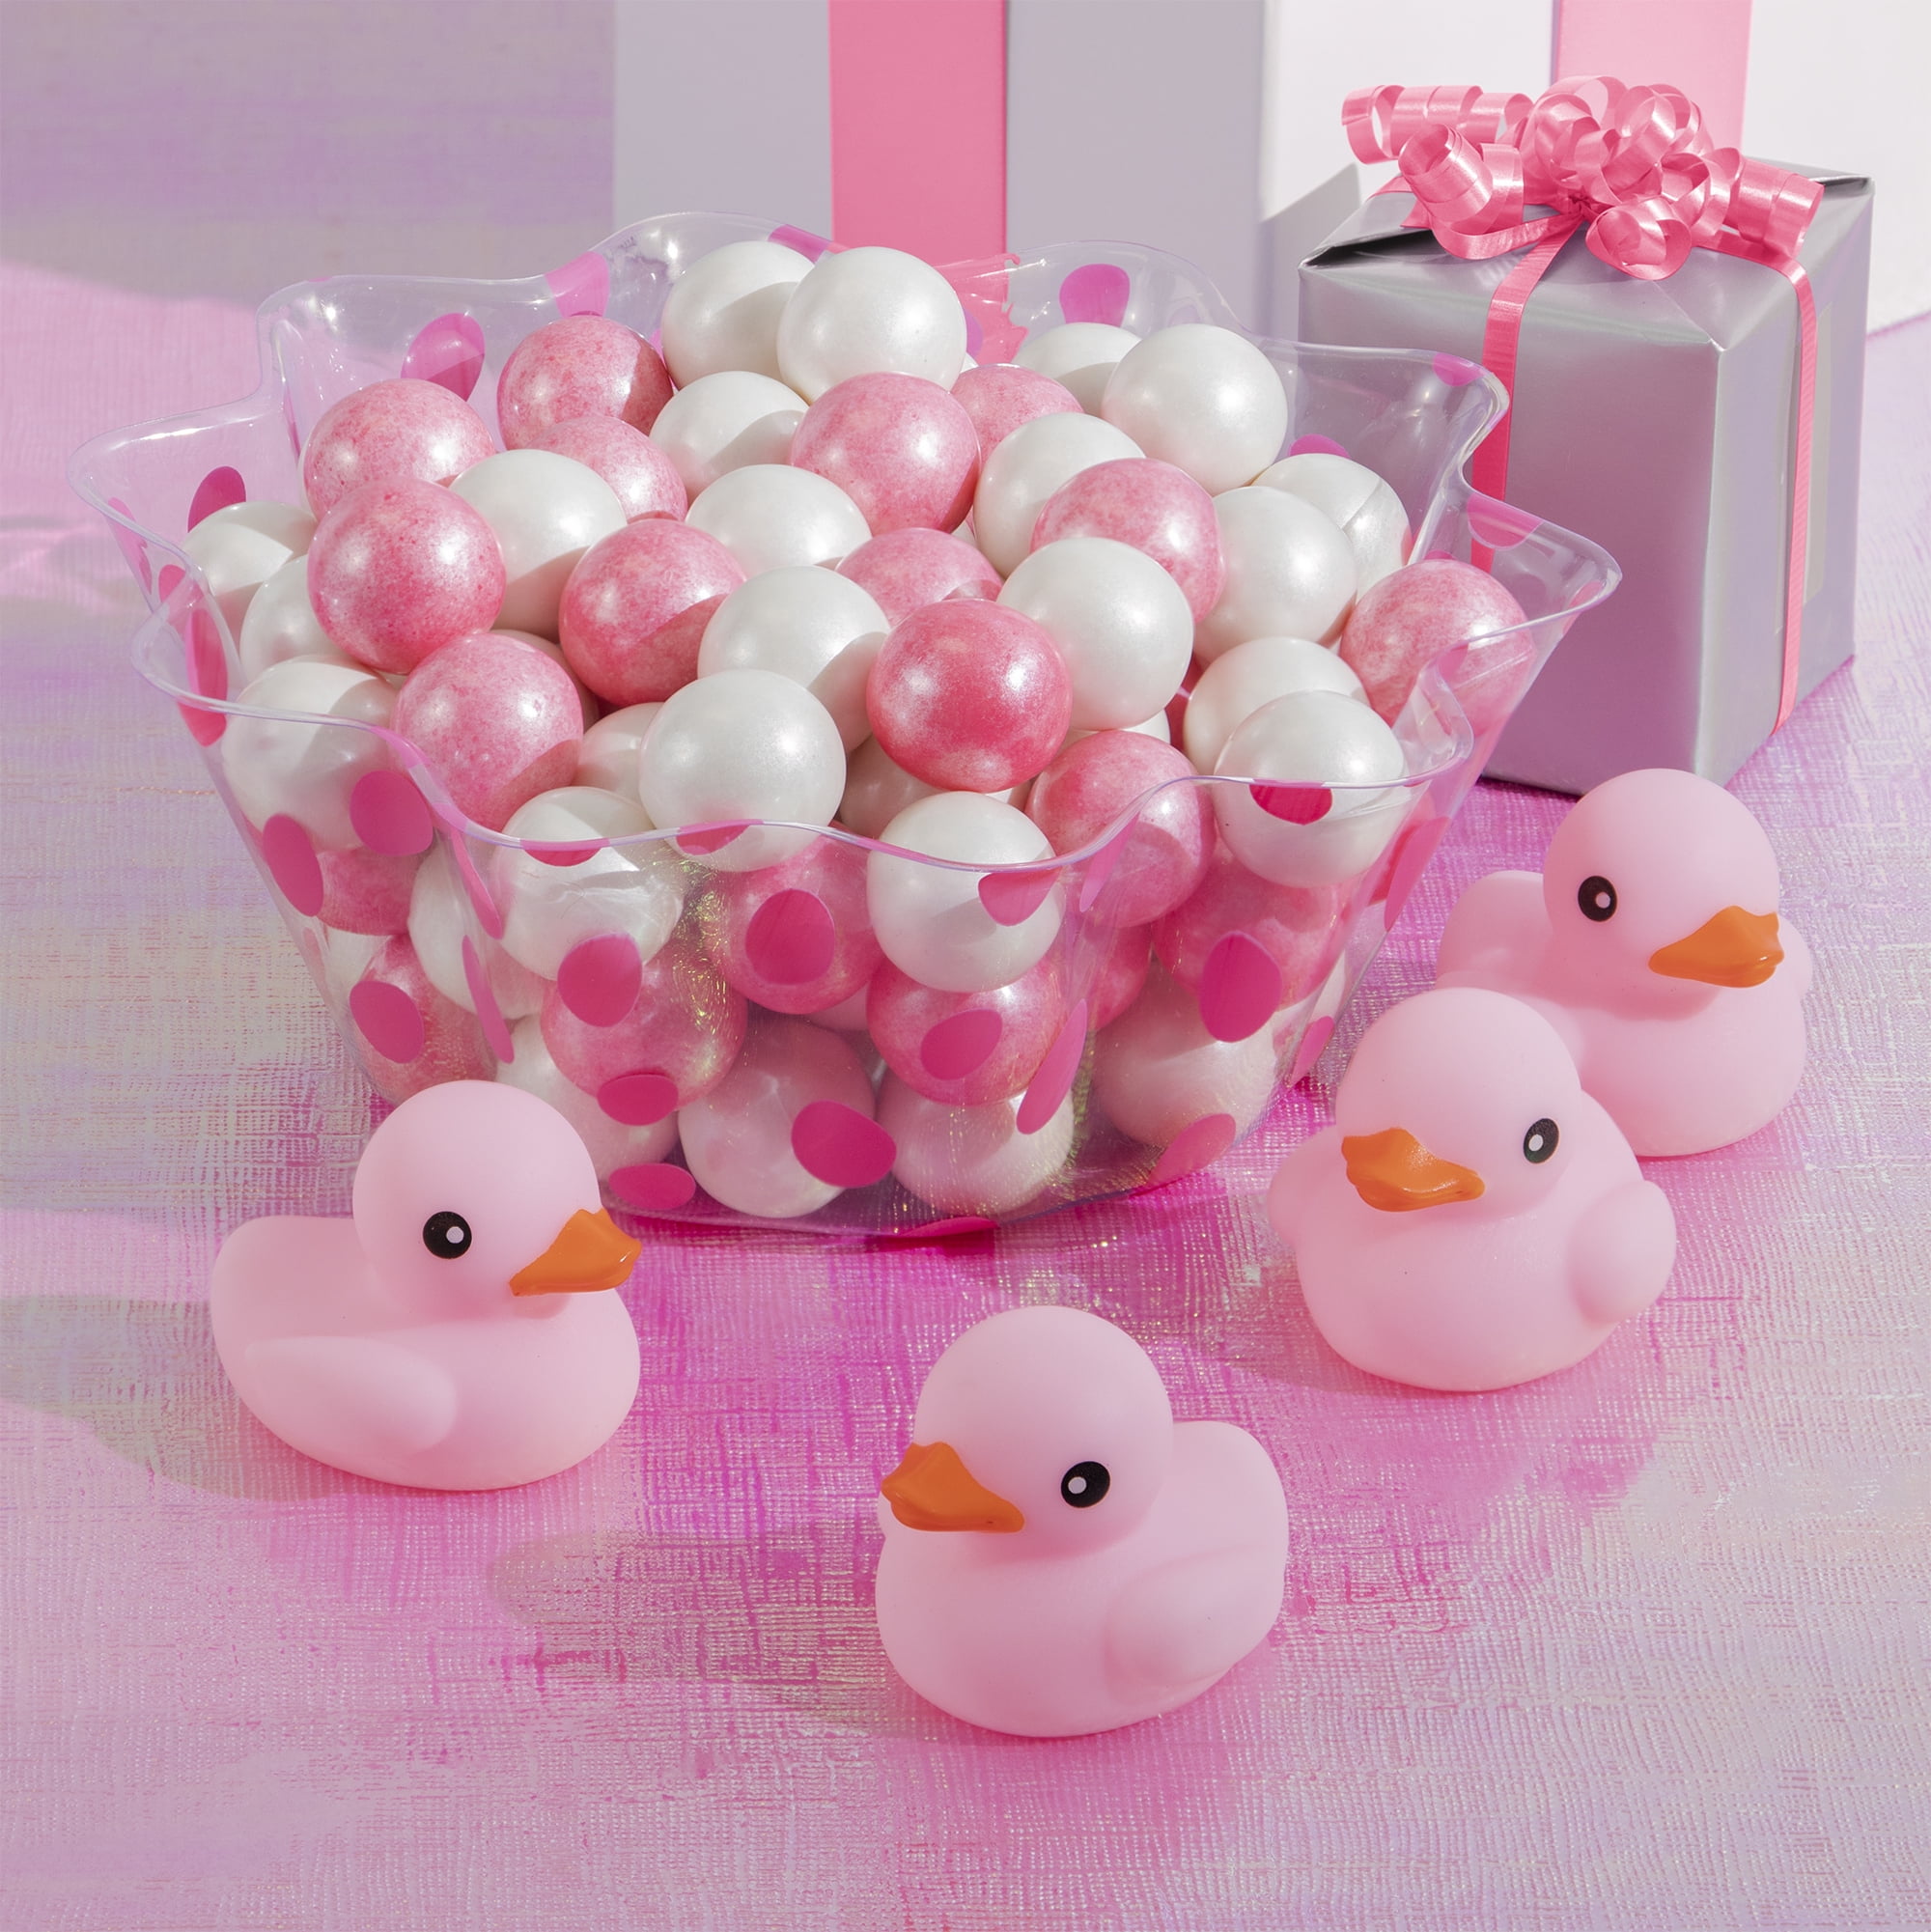 pink rubber duck baby shower